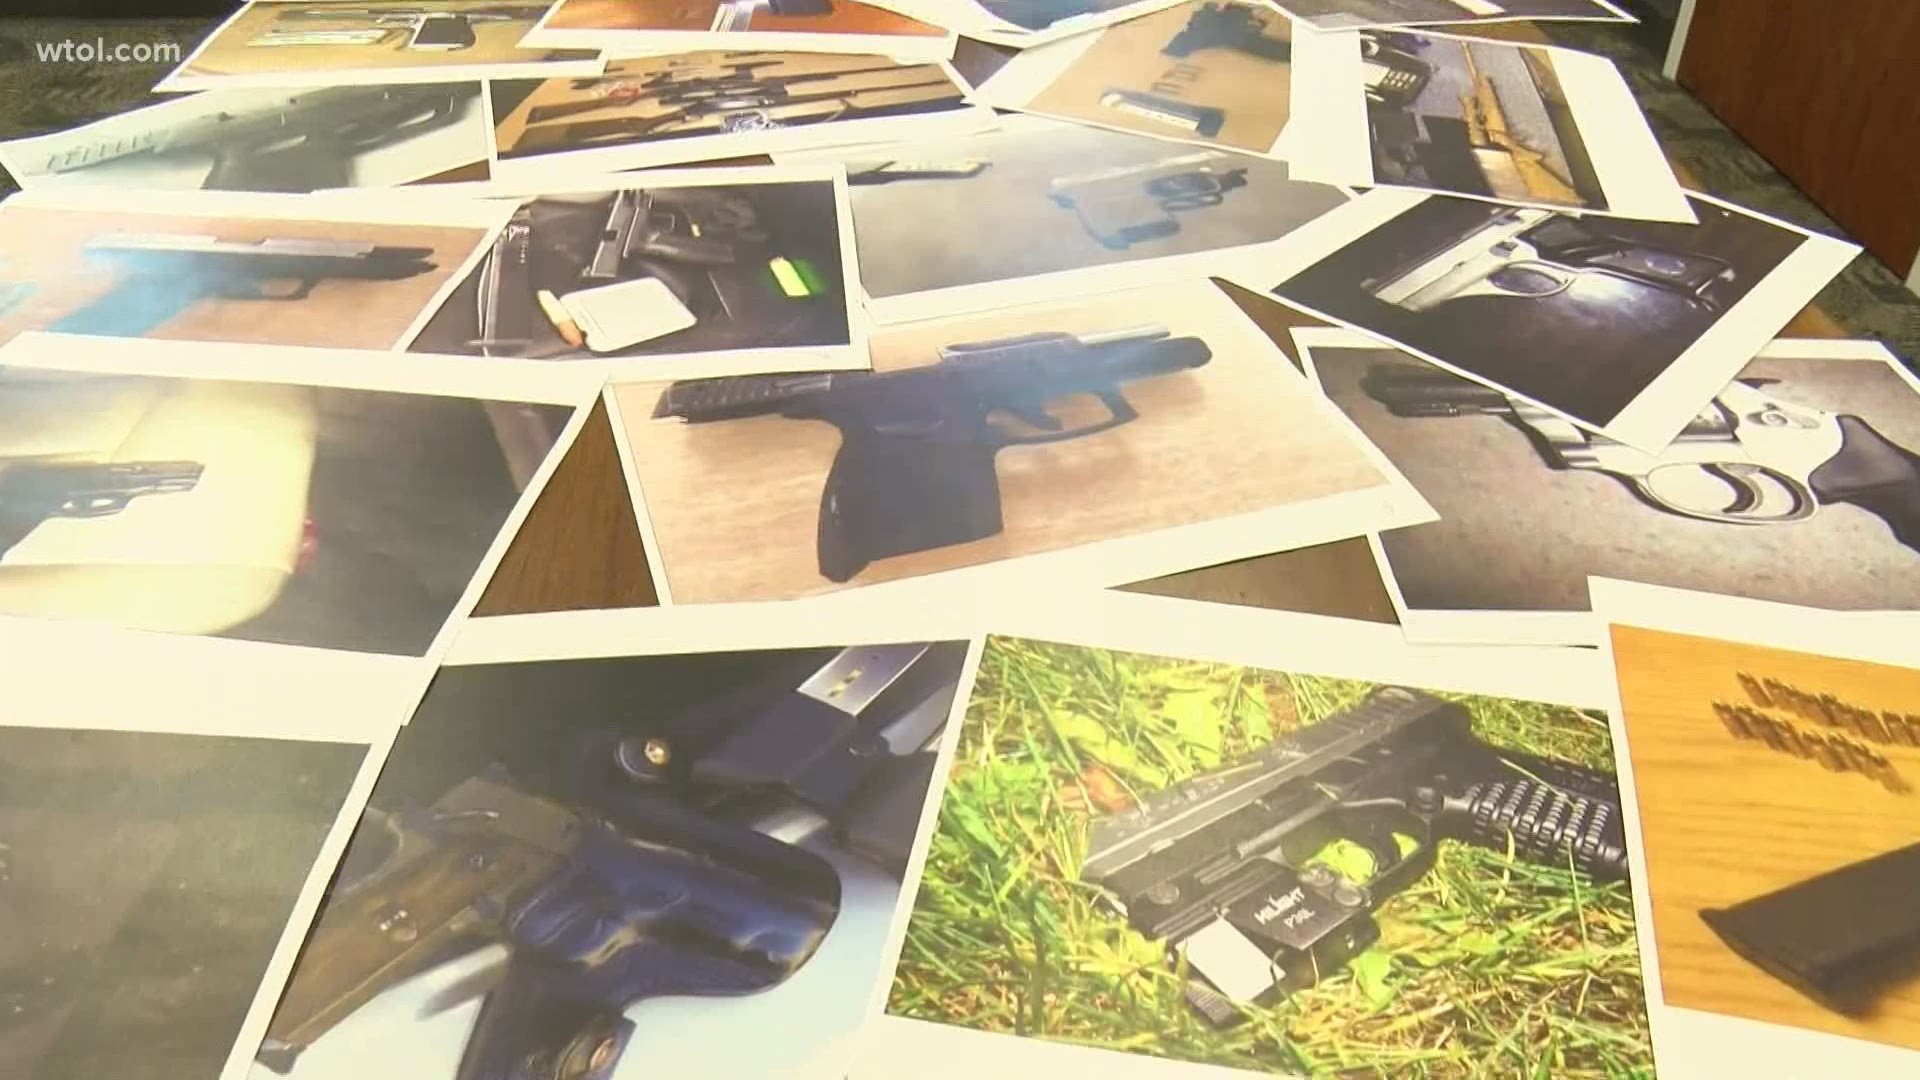 It's not uncommon to recover guns in traffic stops that were used in serious crimes such as a murder or robbery, troopers say.